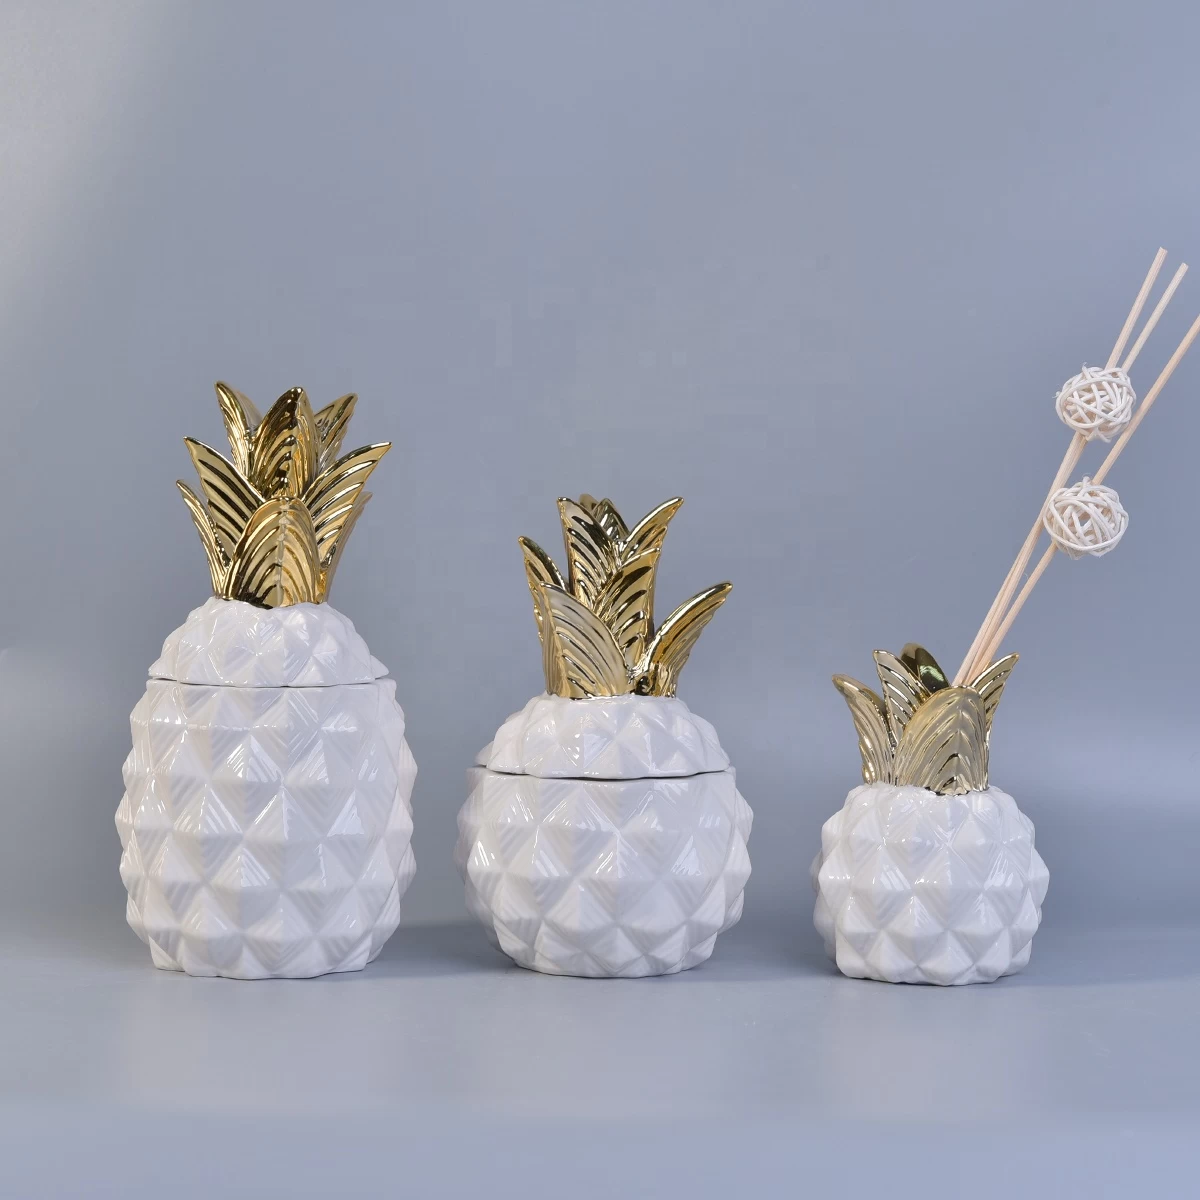 Sunny pineapple white handmade candle ceramic vessel with gold lid